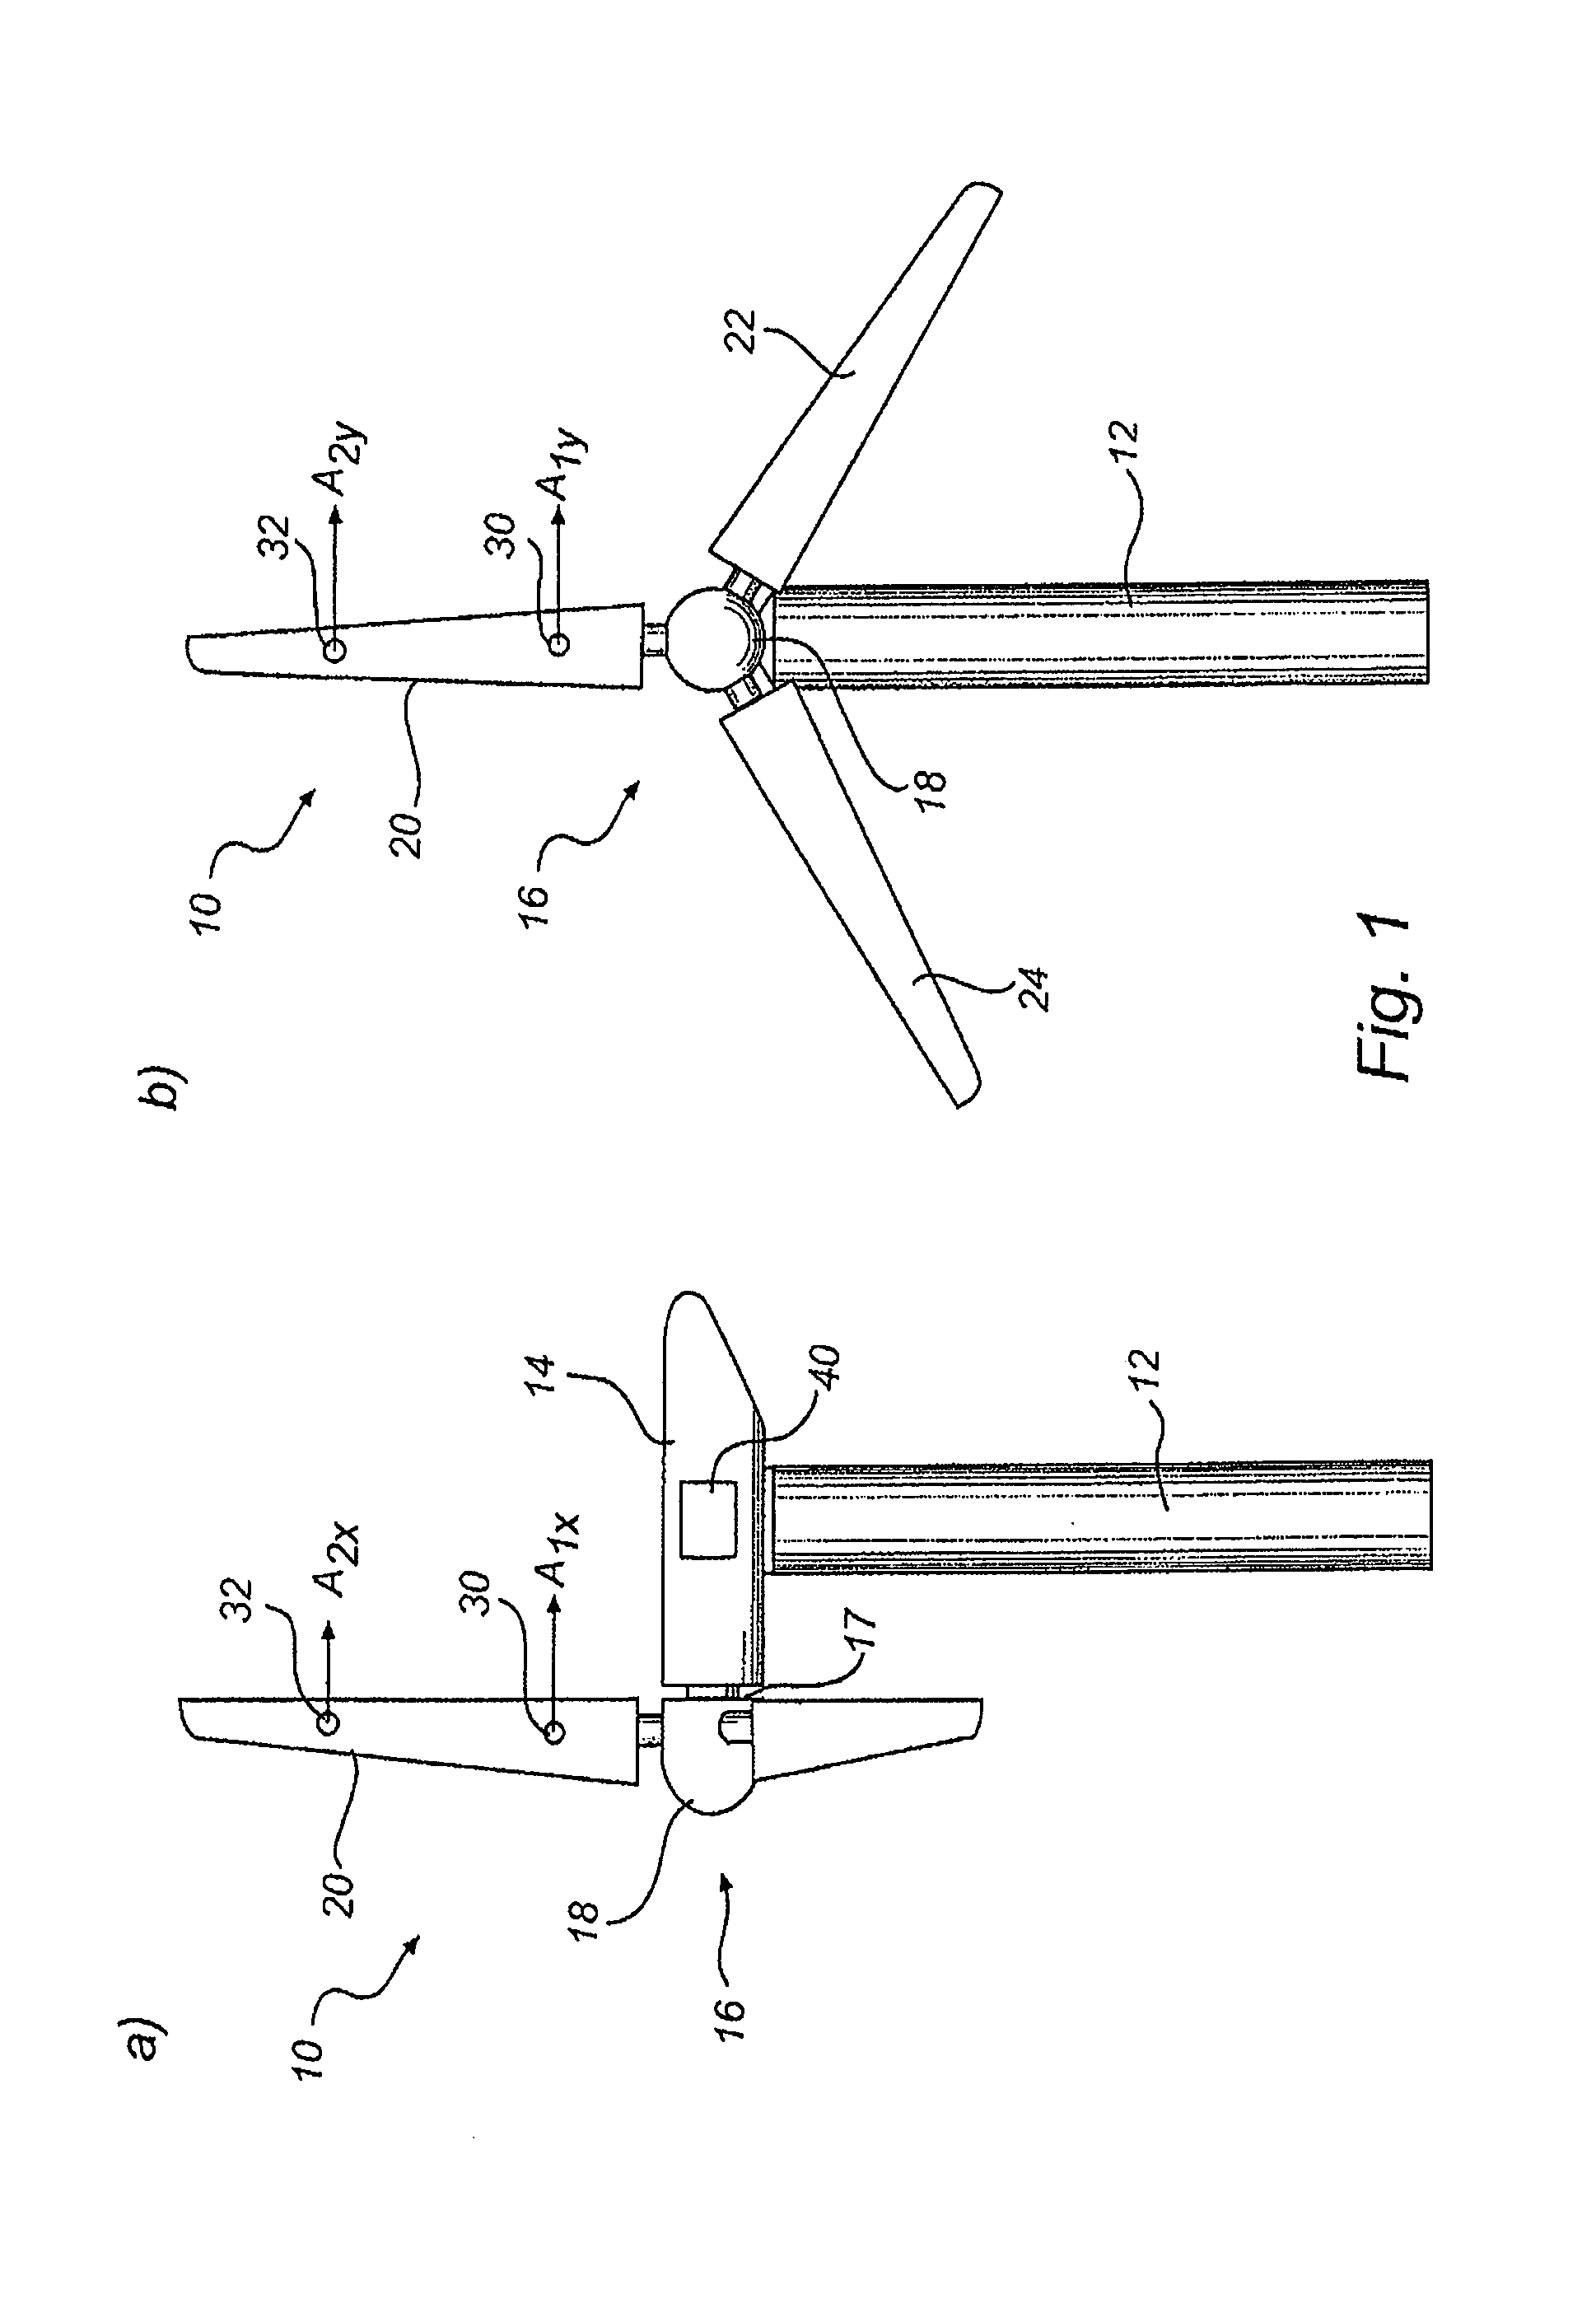 Wind turbine and a method for monitoring a wind turbine